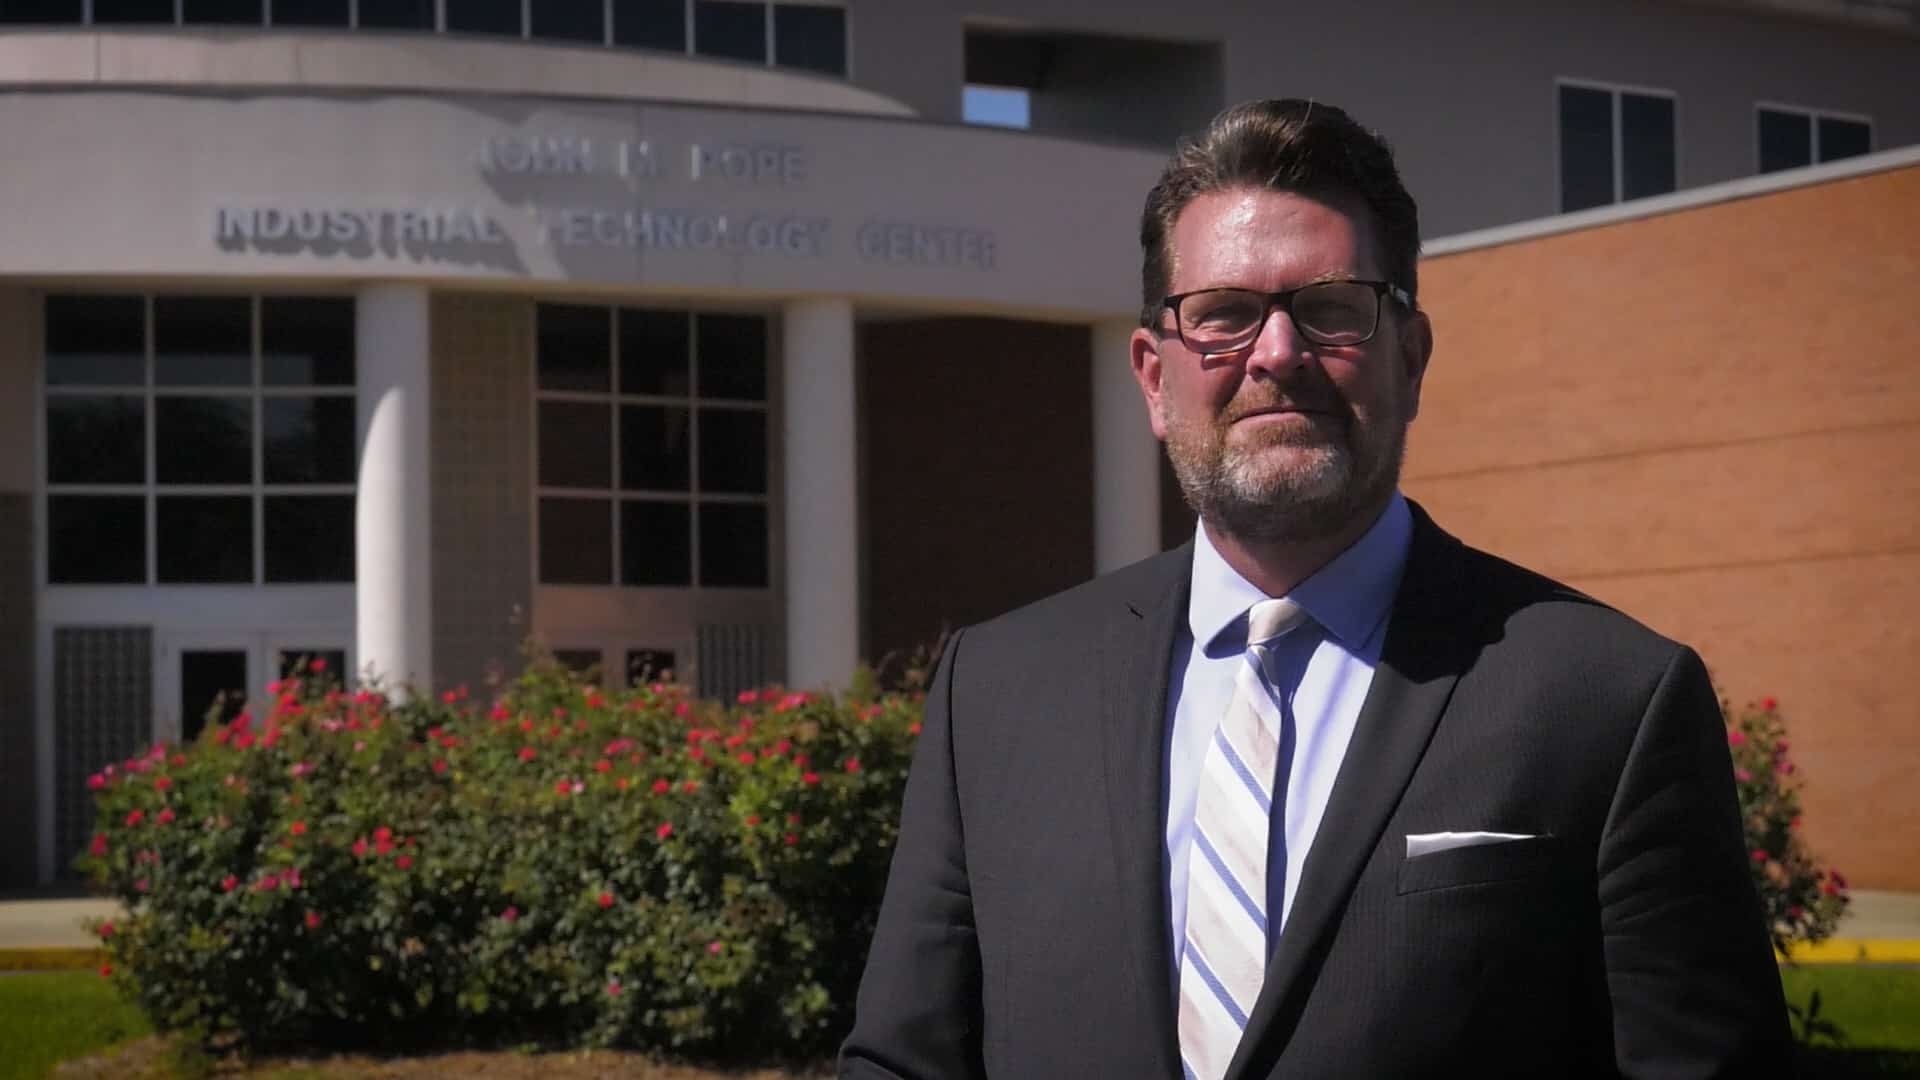 South Georgia Technical College President Dr. John Watford encourages faculty, staff, and students to view the COVID-19 informational video to update themselves on preventative measures to help slow the spread of the virus.